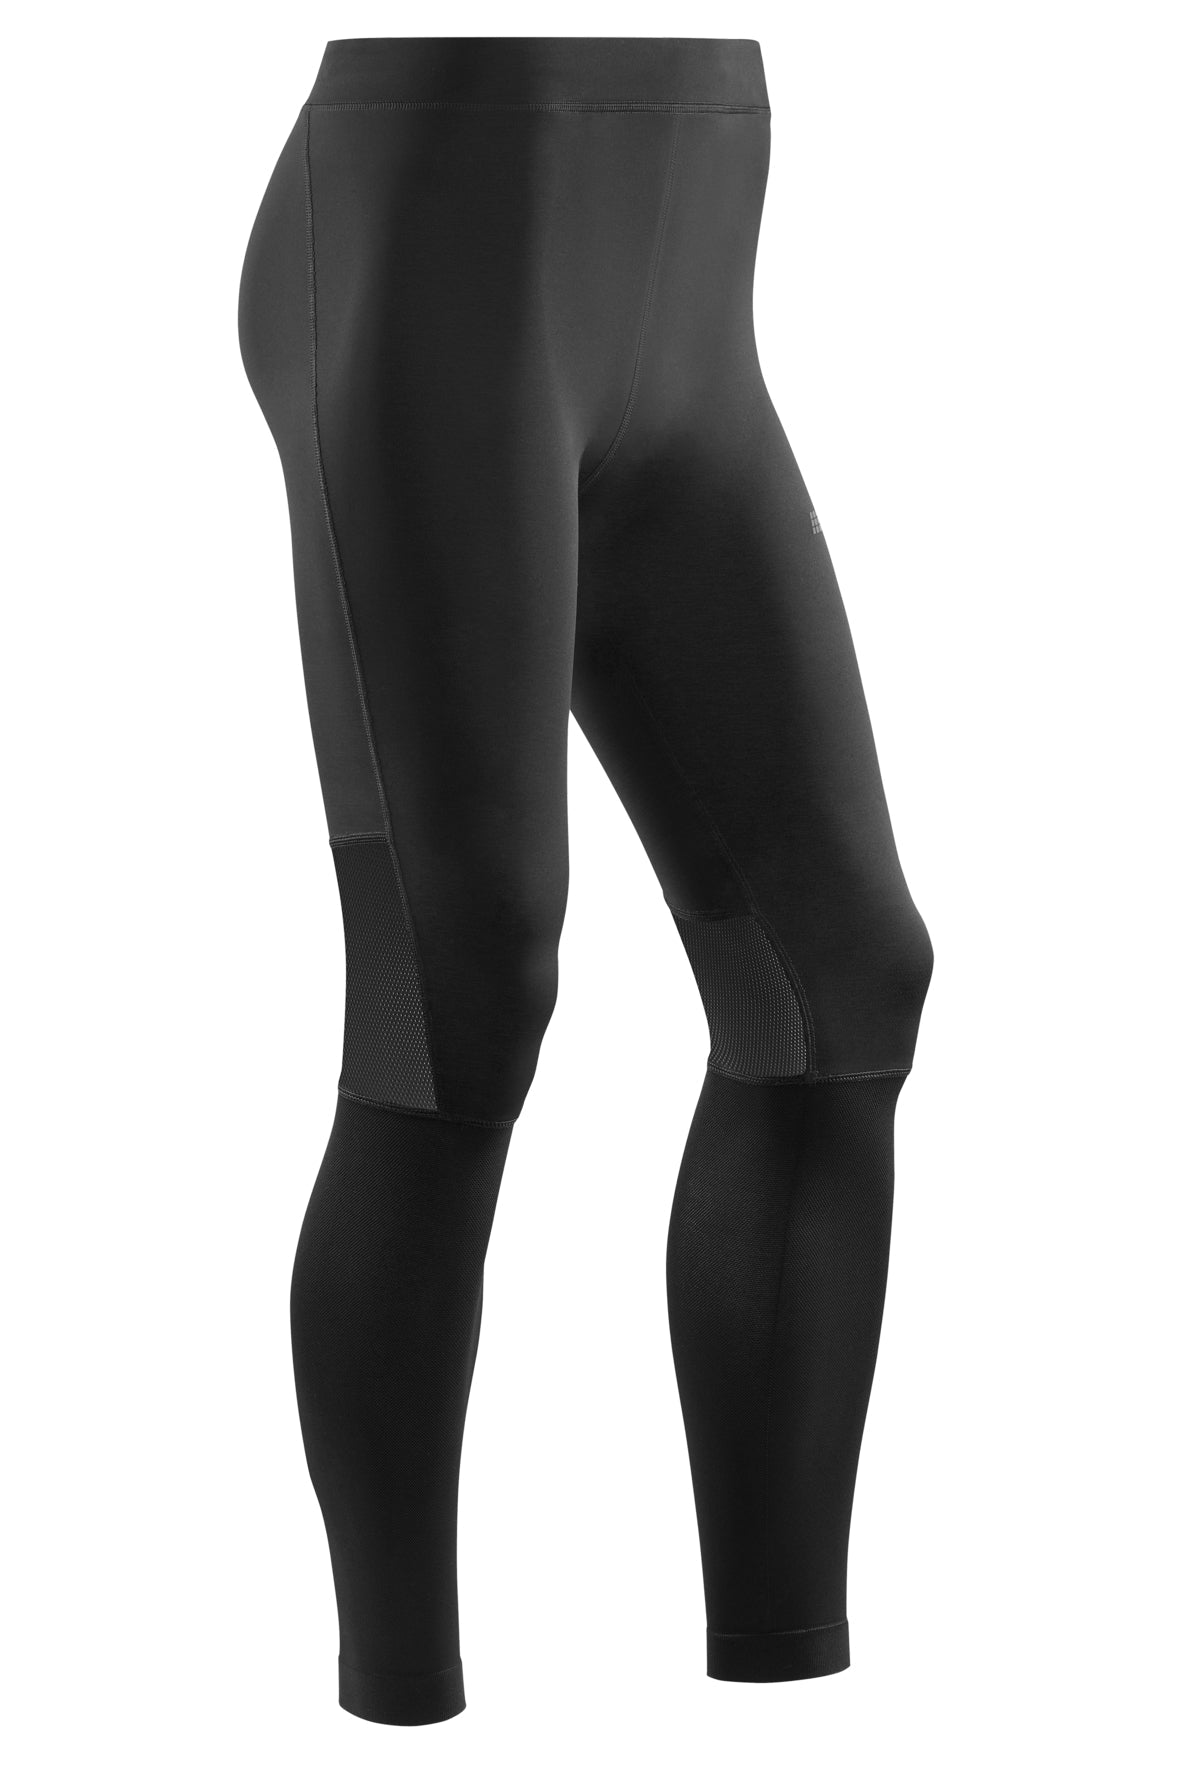 Cep Recovery PRO Compression Tights Women Size 2 Black W9G9G